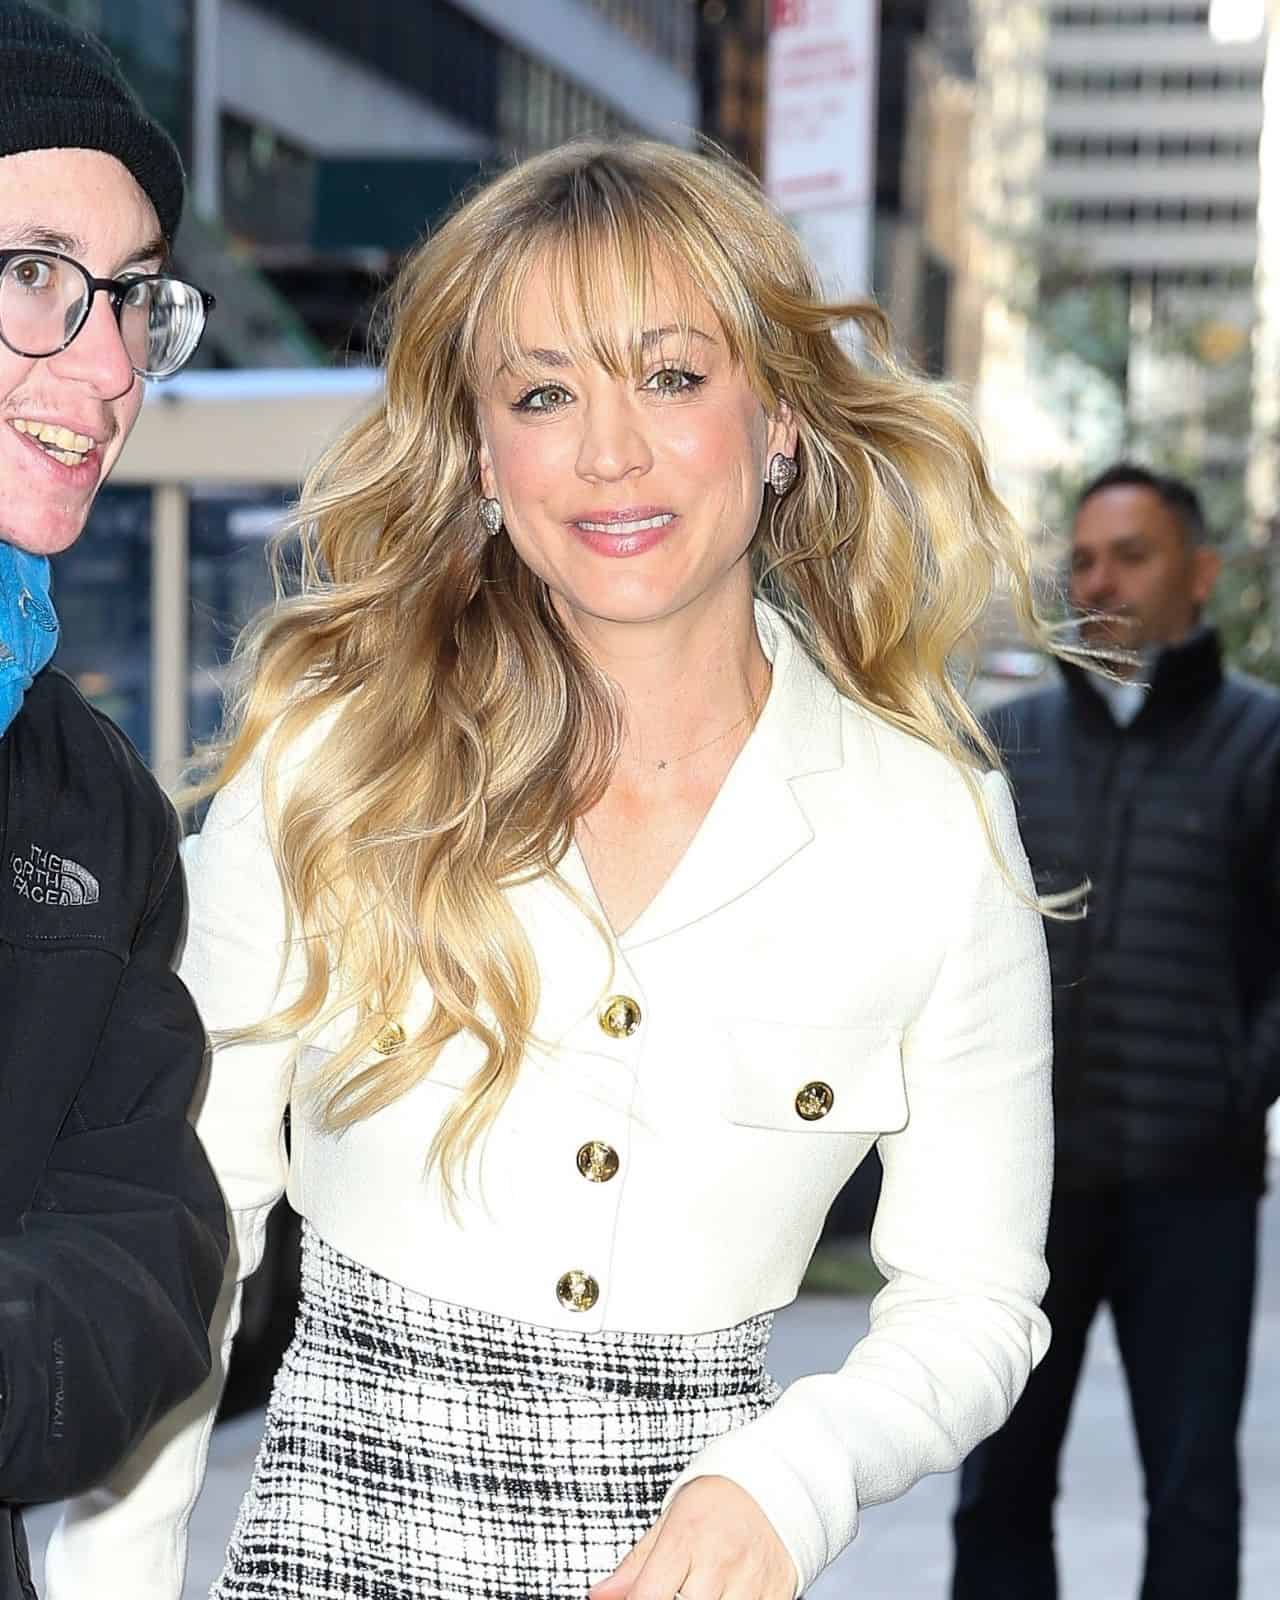 Kaley Cuoco Looked Spectacular in a Plaid Skirt and Blazer for GMA in NY